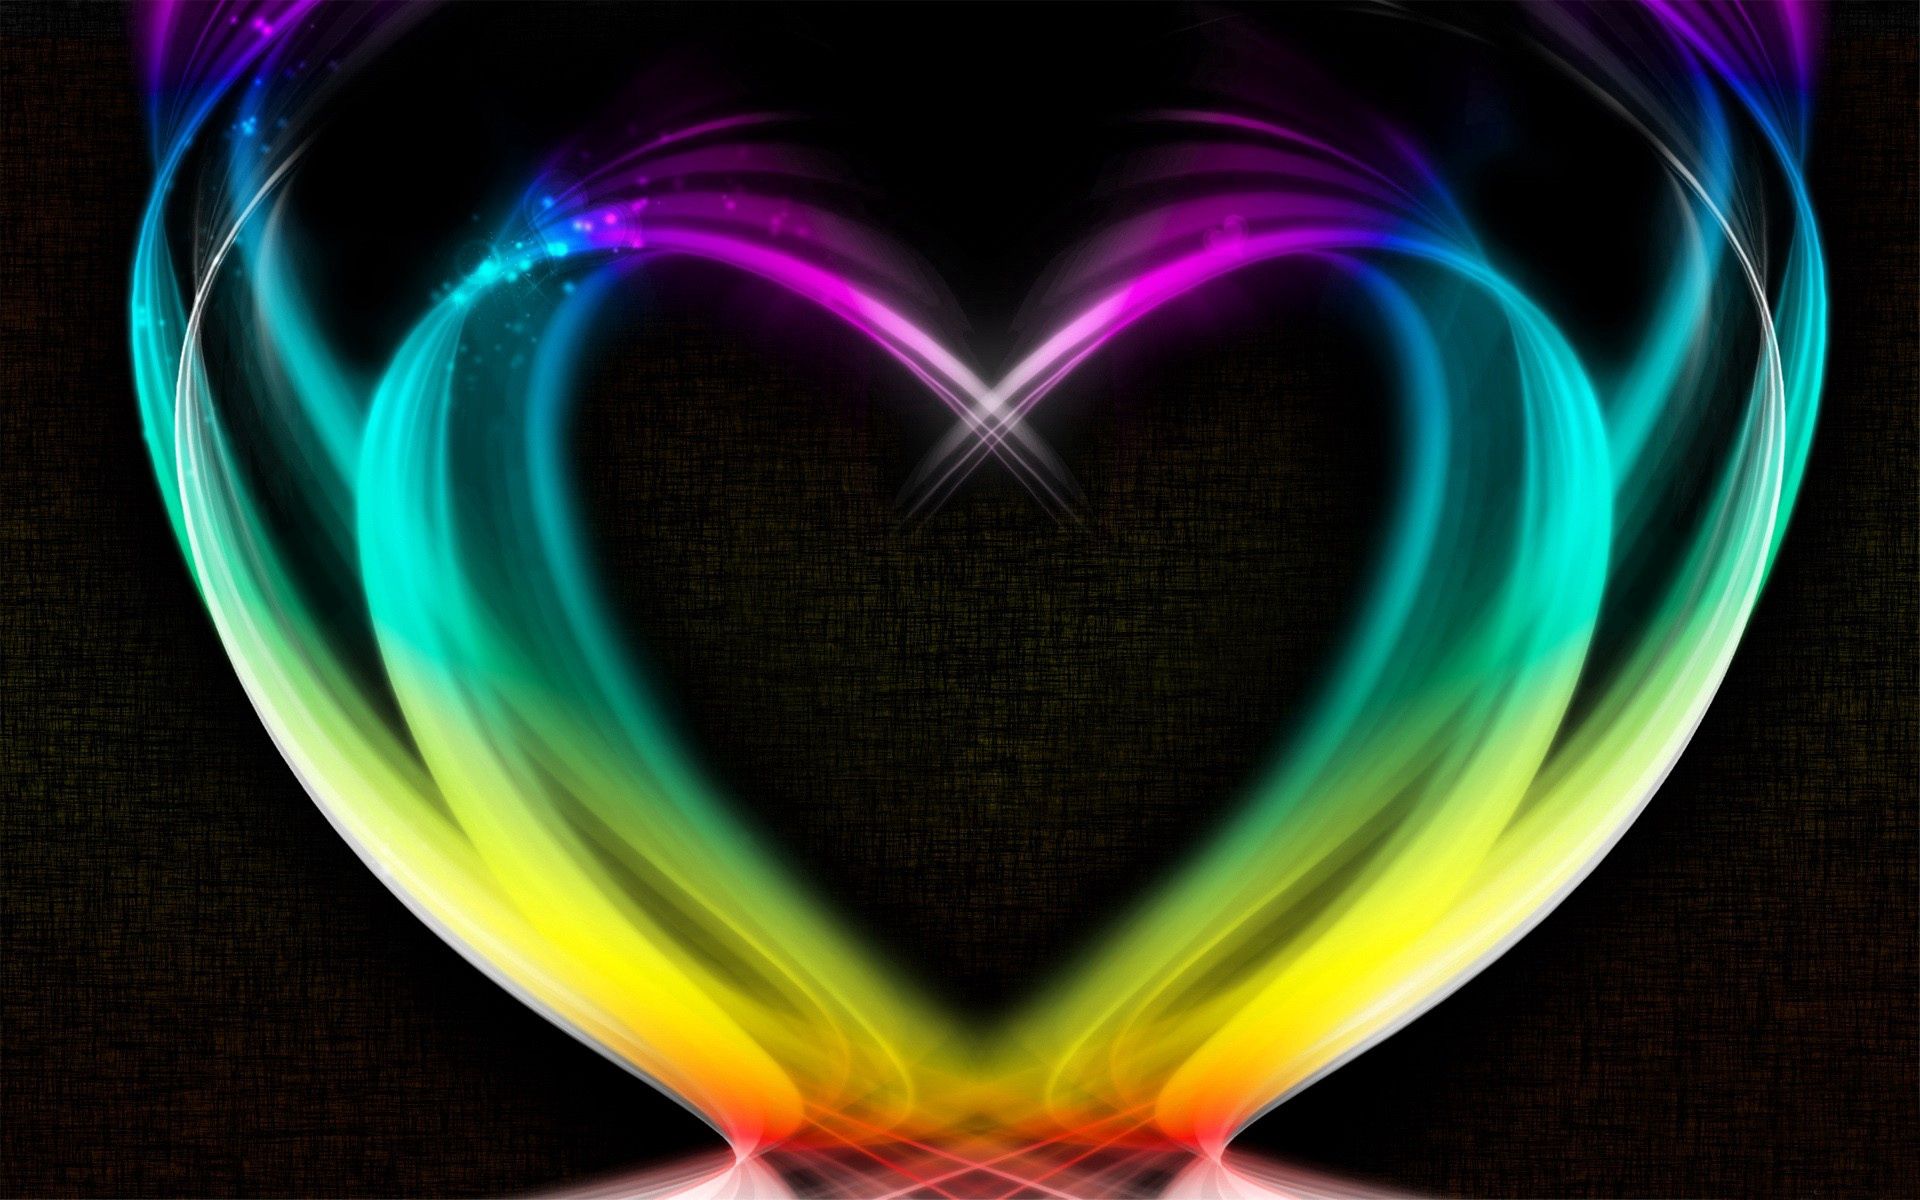 90816 free wallpaper 320x480 for phone, download images smoke, heart, iridescent, rainbow 320x480 for mobile